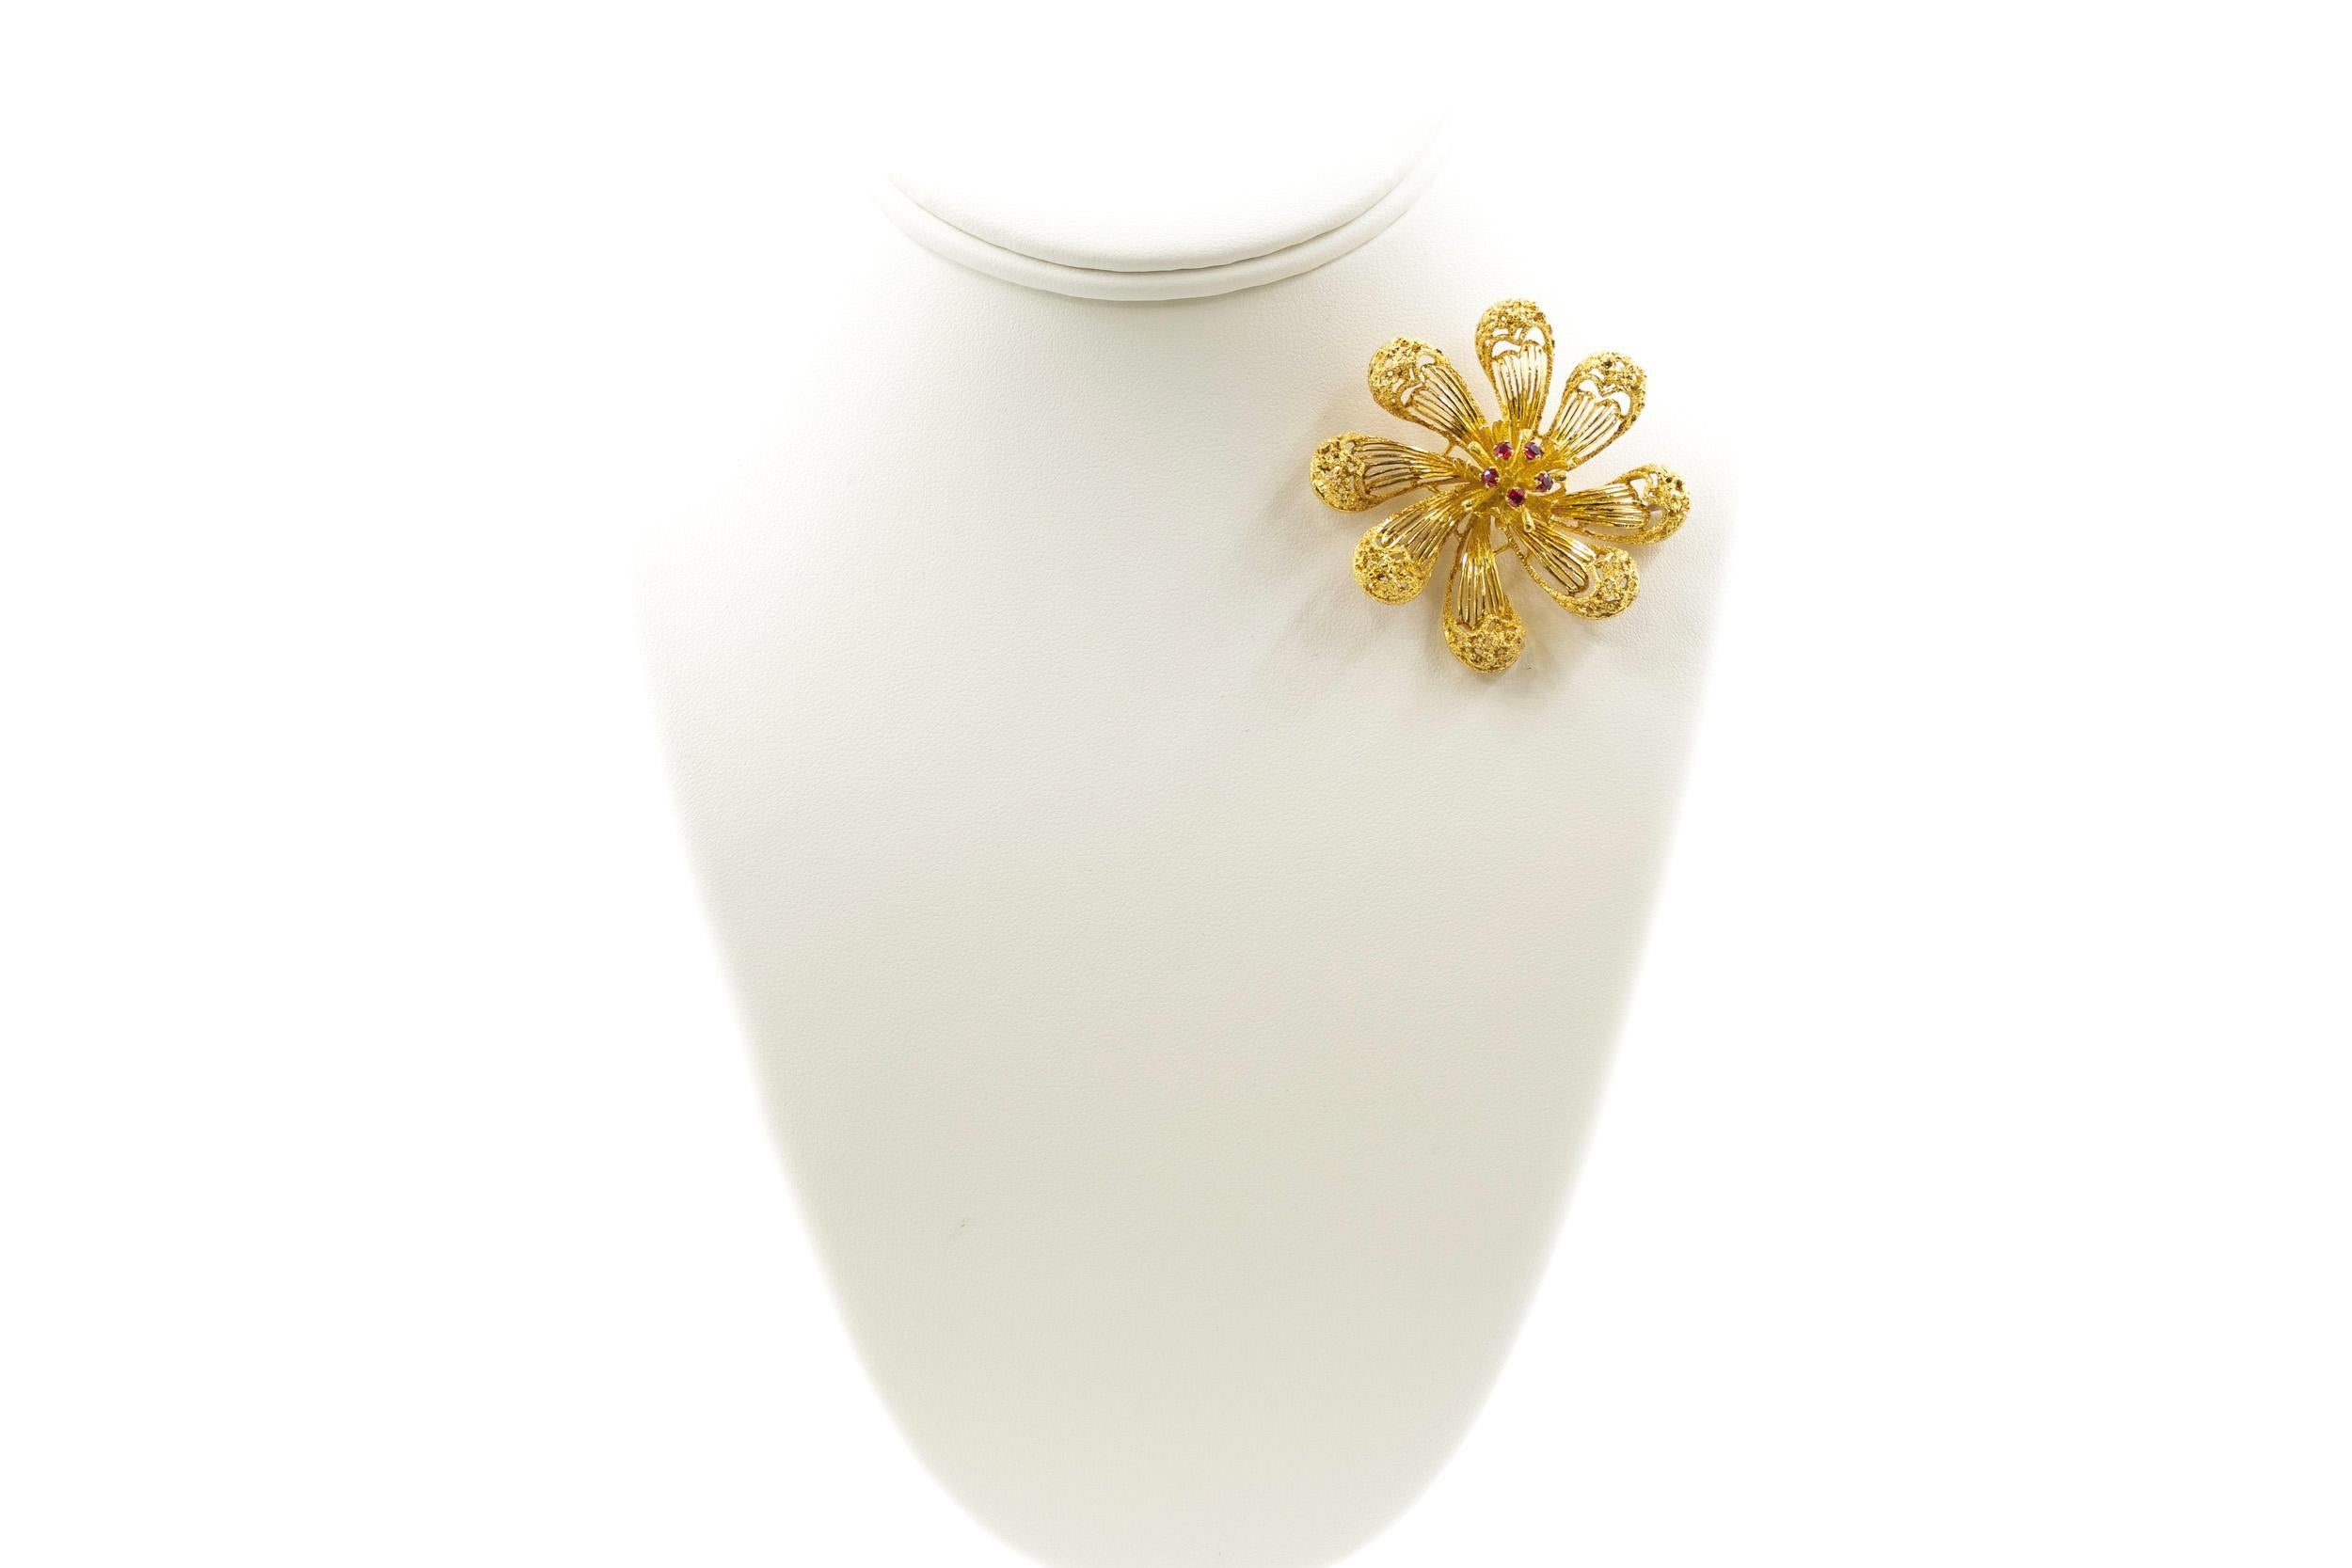 18K YELLOW GOLD GEMSET PIERCED FLOWER BROOCH
Italy, circa late 20th century; marked to underside 